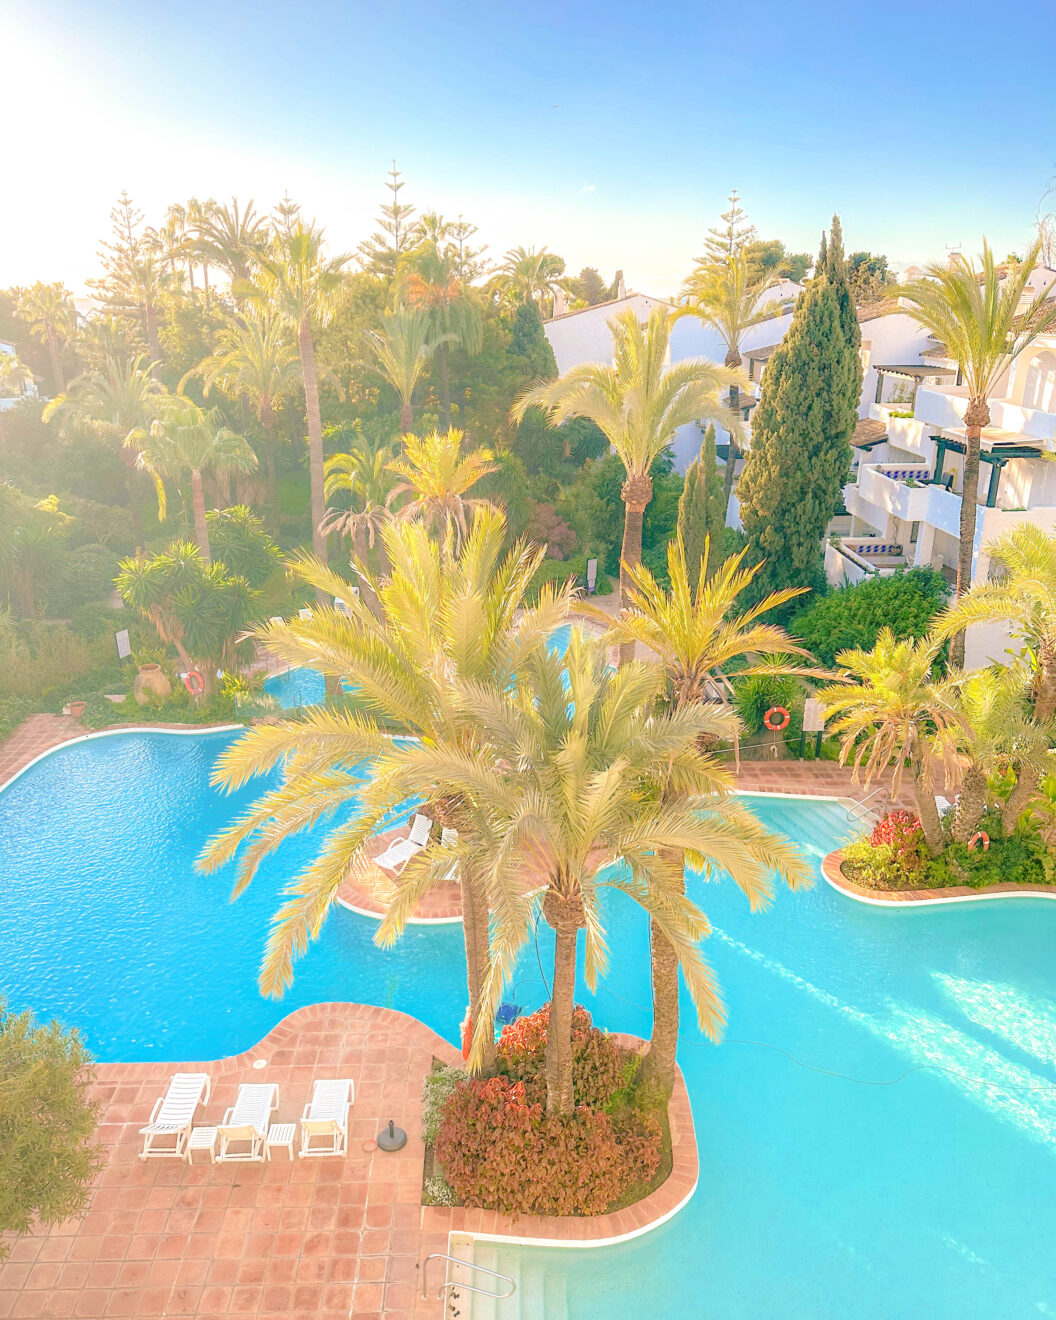 View of swimming pool and palm trees from puente romano penthouse